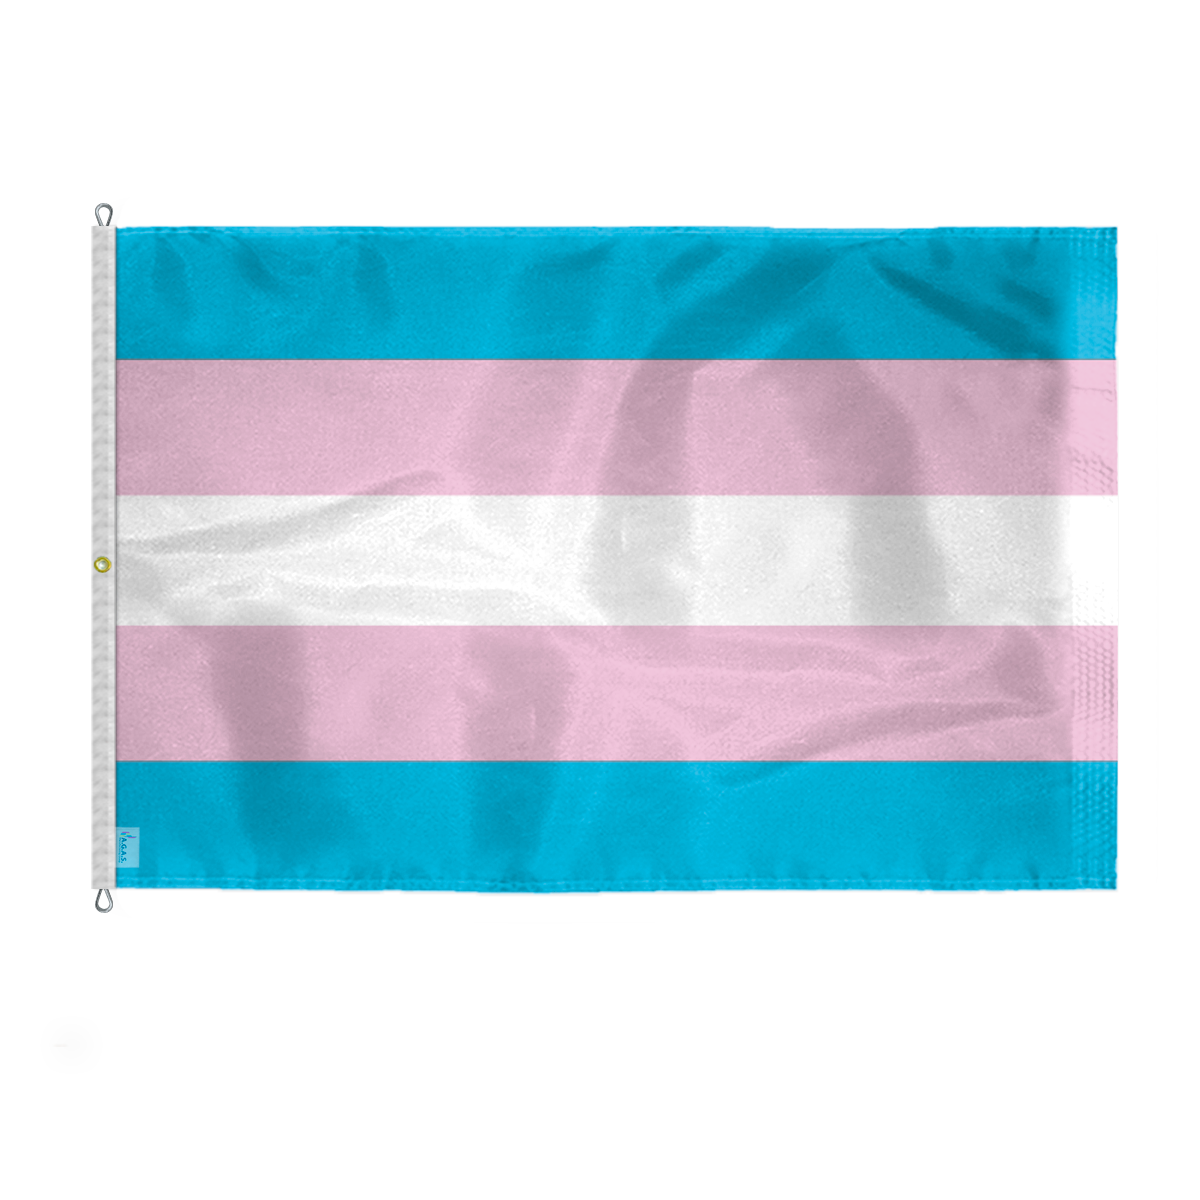 AGAS Large Transgender Pride Flag 10x15 Ft - Double Sided Printed 200D Nylon